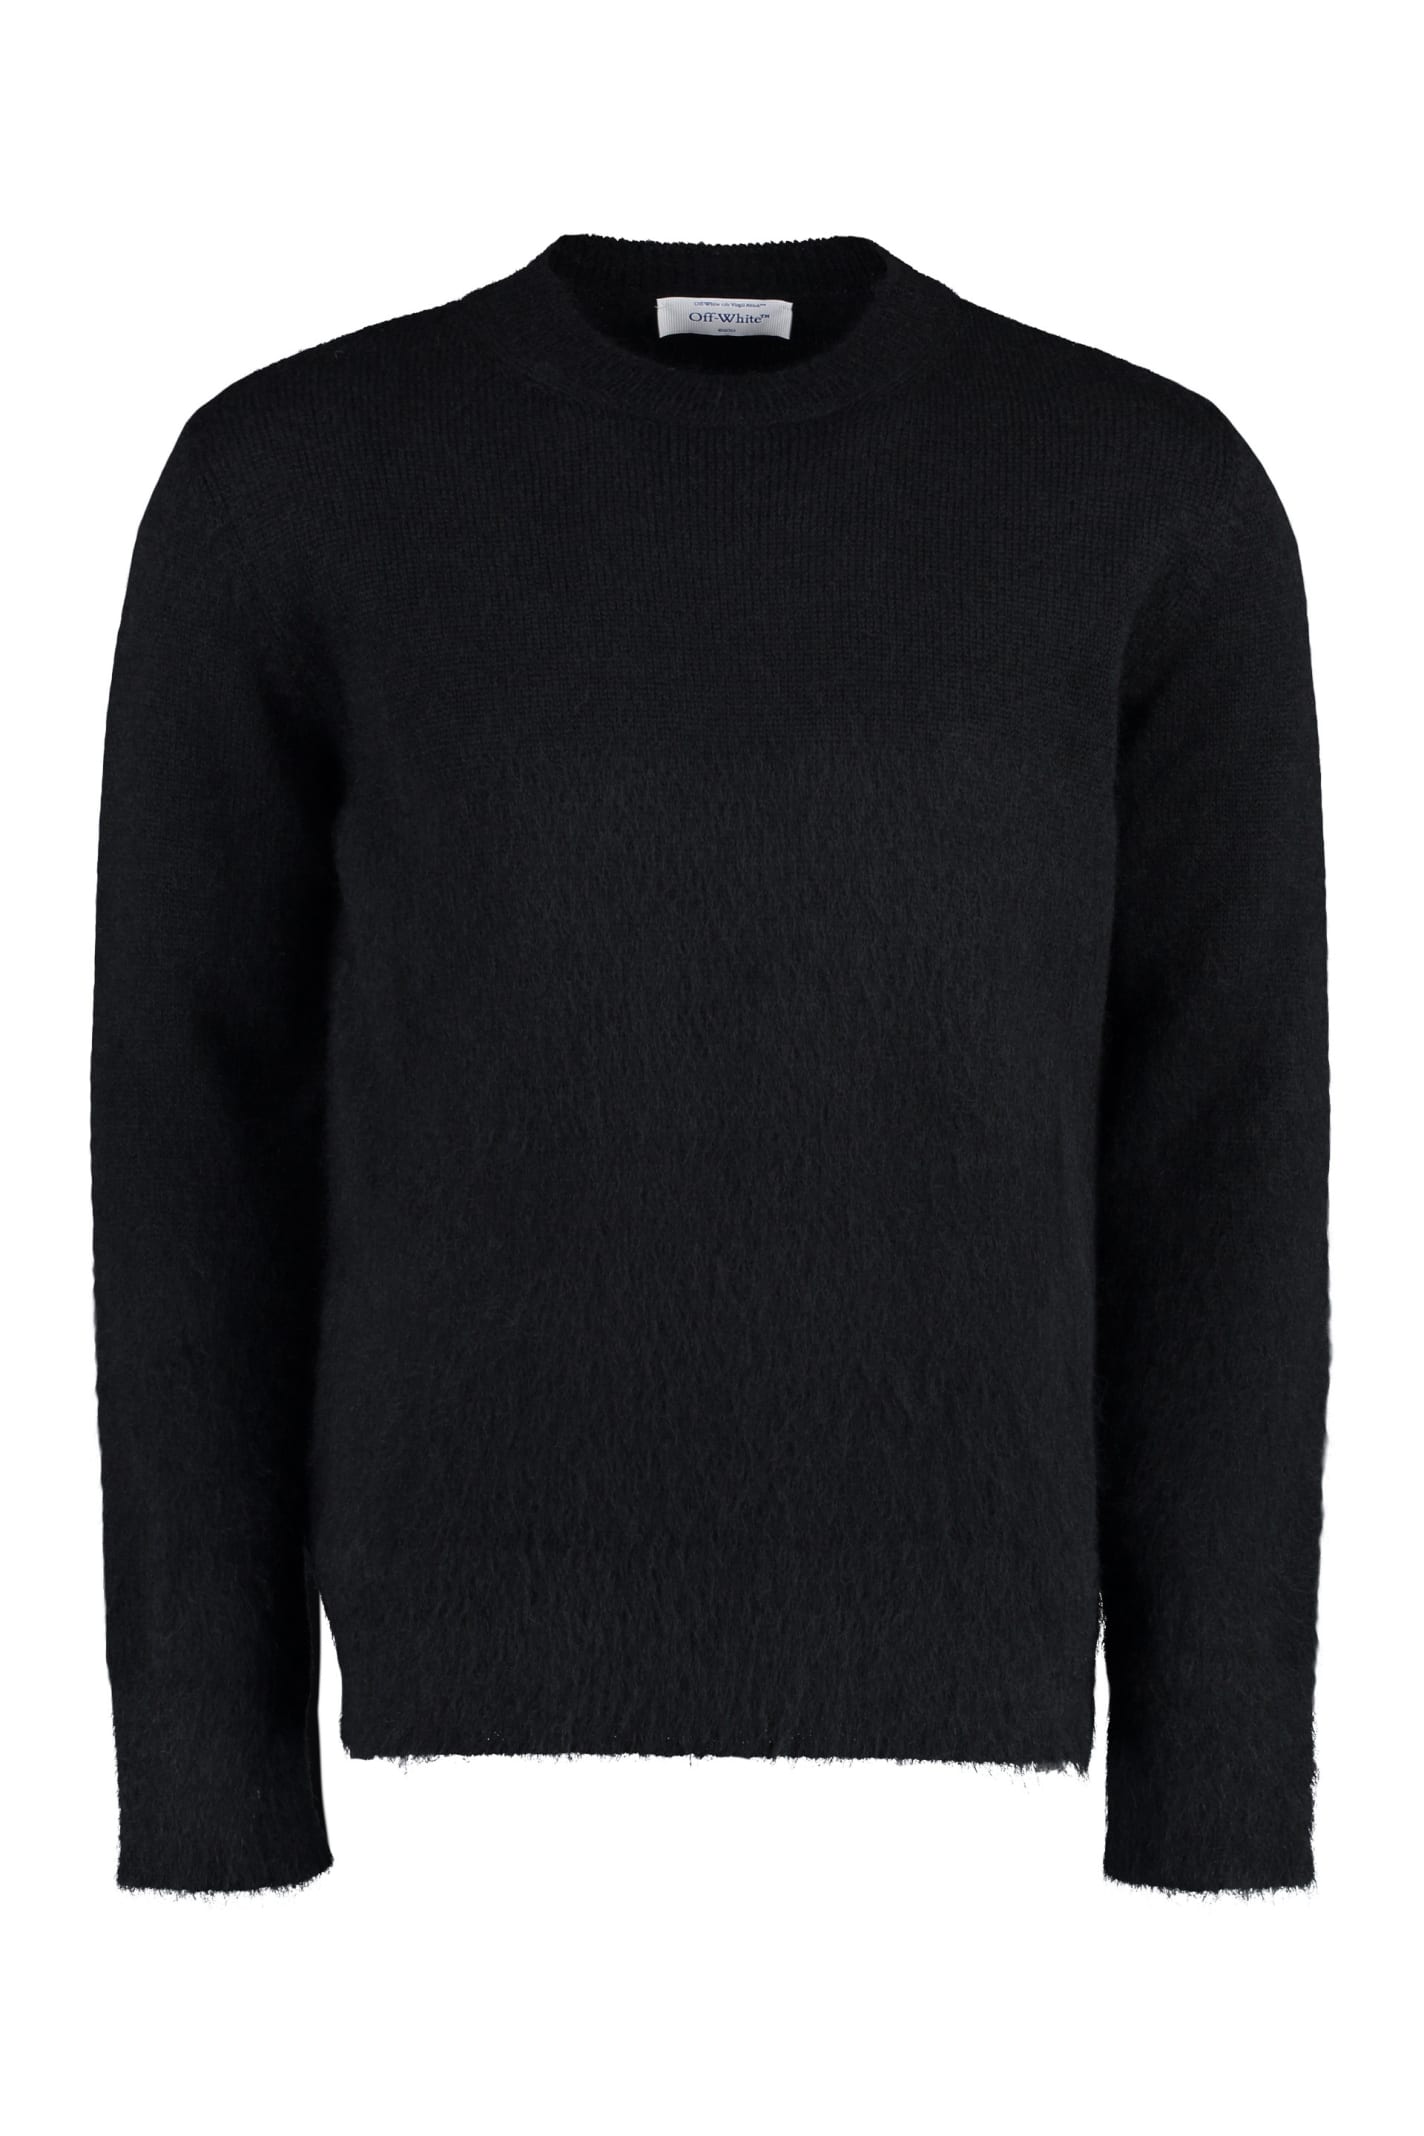 Off-white Mohair Blend Sweater In Black